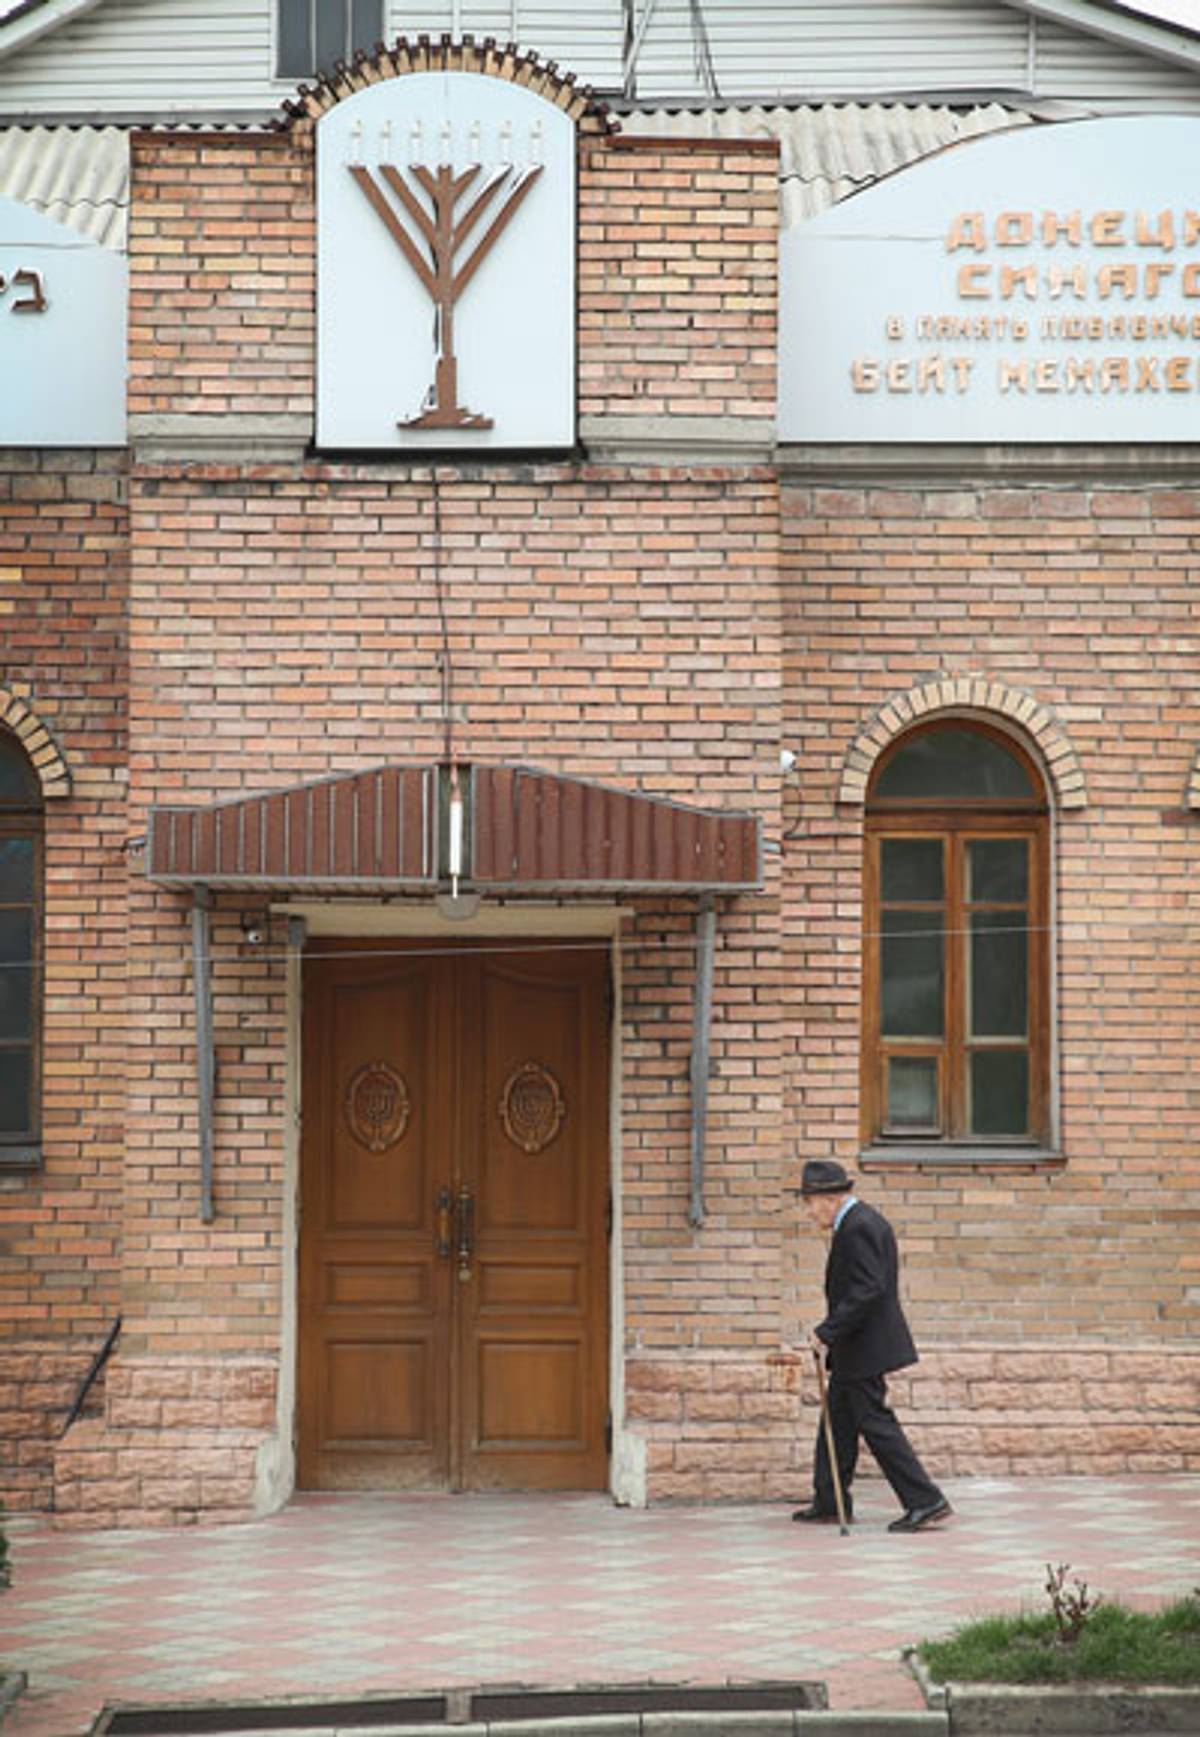 A worshipper arrives at the Chabad Lubavitch synagogue in Donetsk, in April 2014 (Photo: Scott Olson/Getty Image)